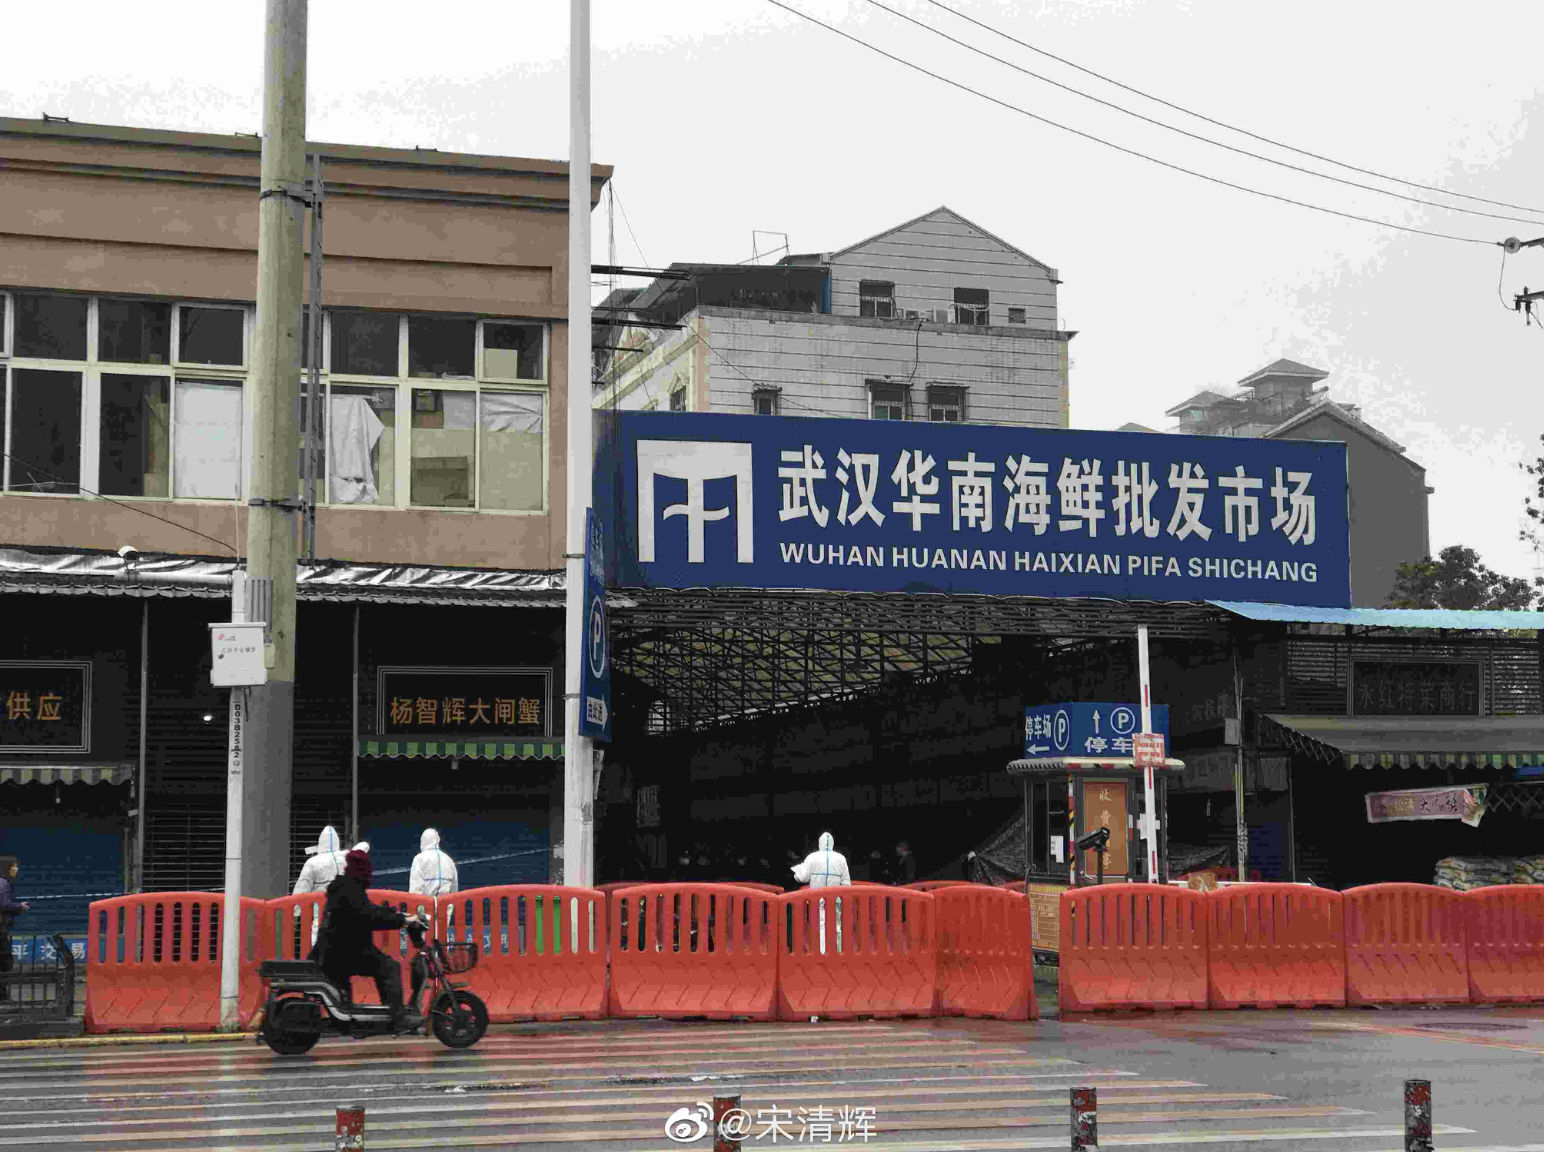 The now-closed Huanan wet market where the novel coronavirus is thought to have originated. Photo: 宋清辉/Weibo 